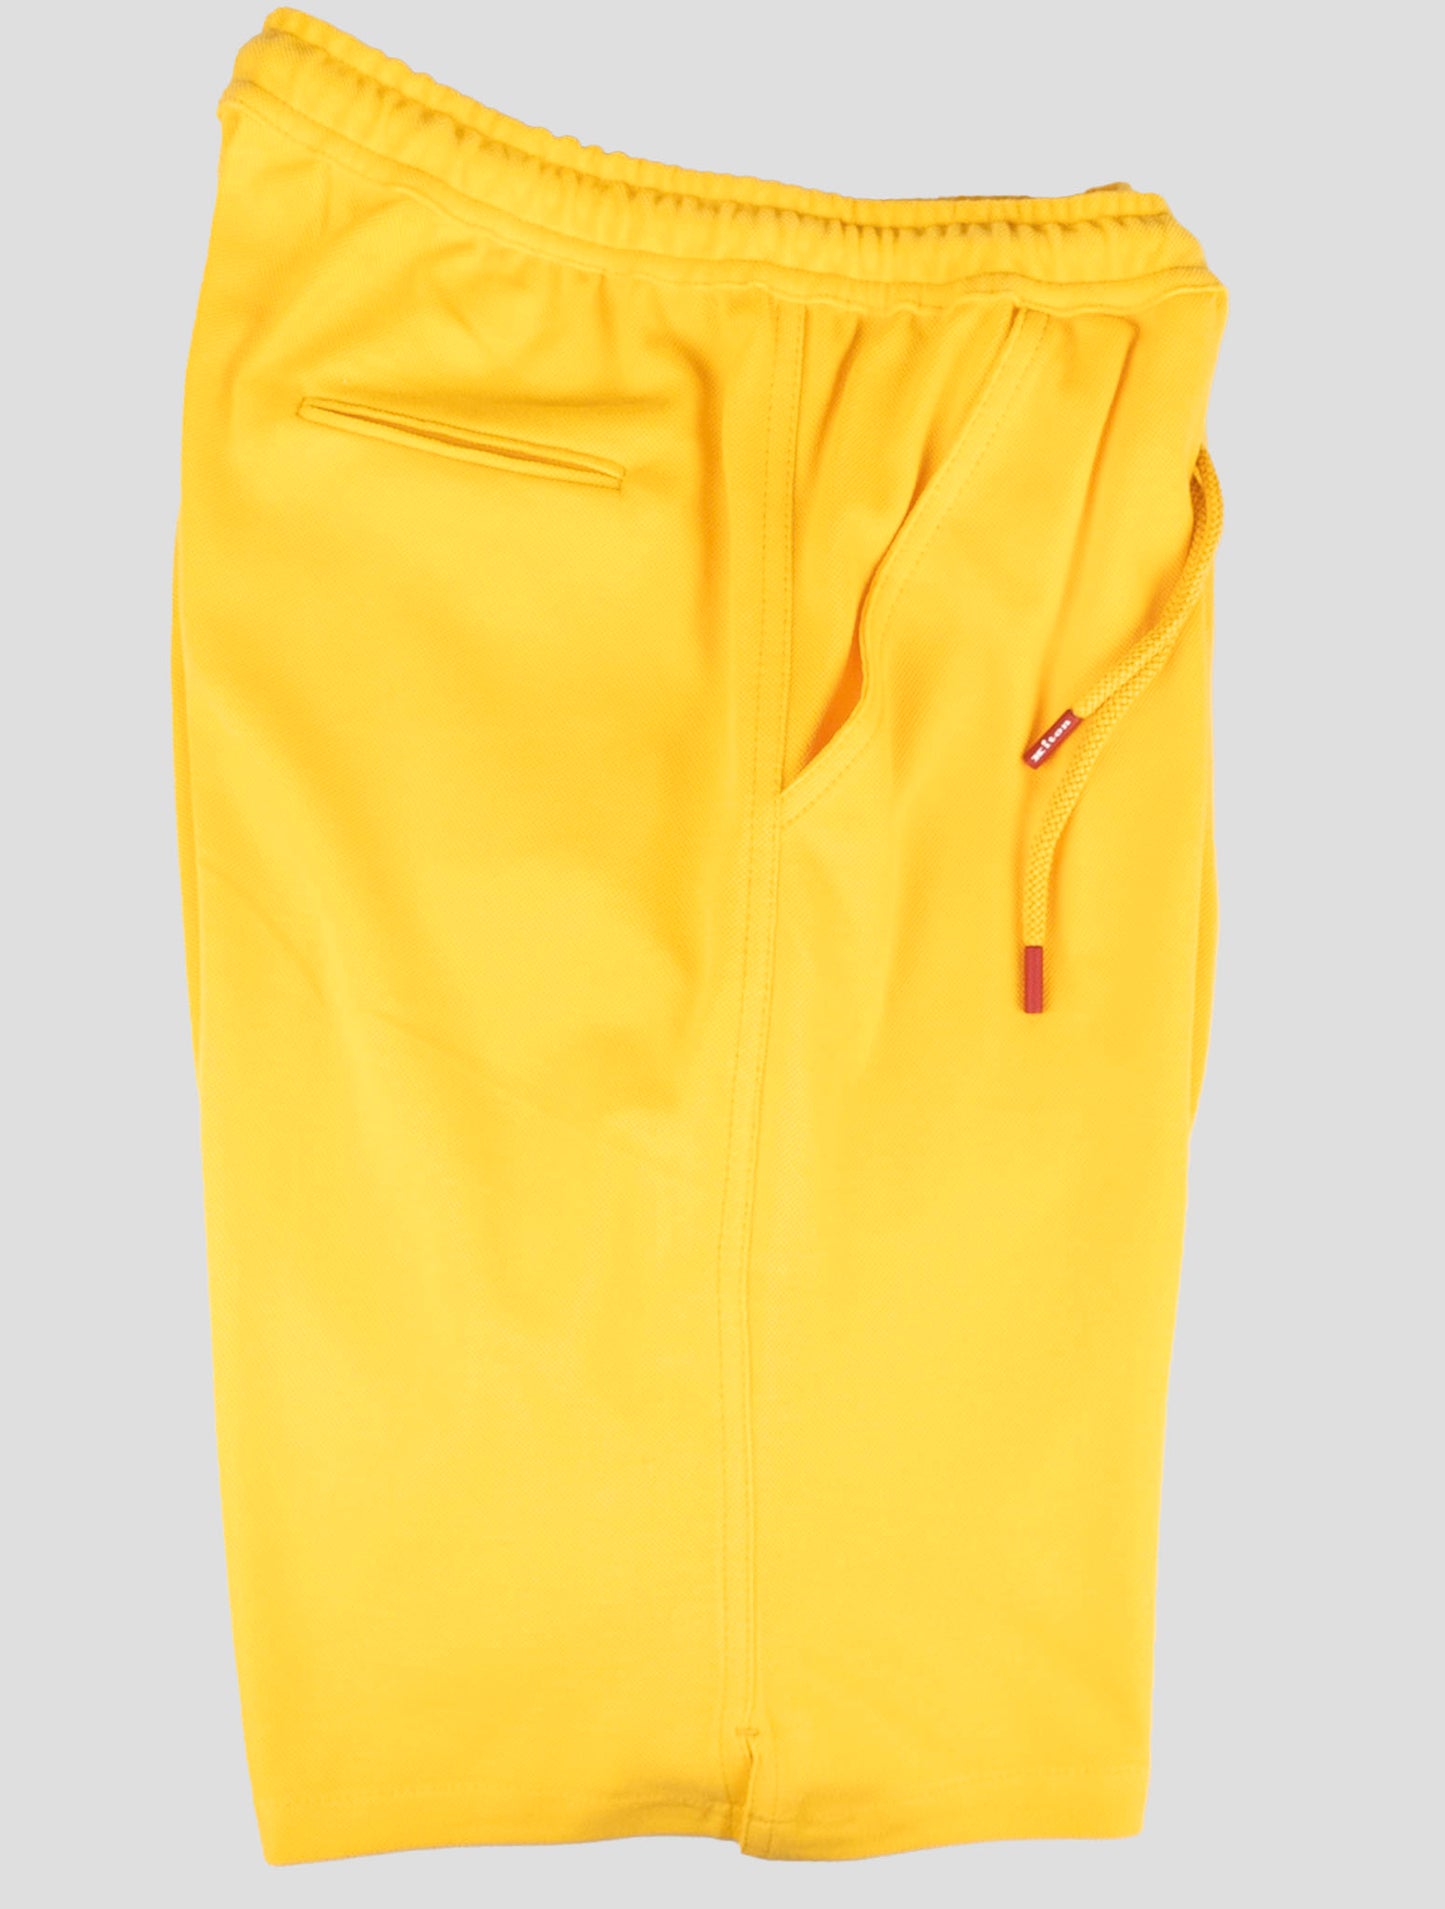 Kiton Matching Outfit - Blue and White Mariano and Yellow Short Pants Tracksuit